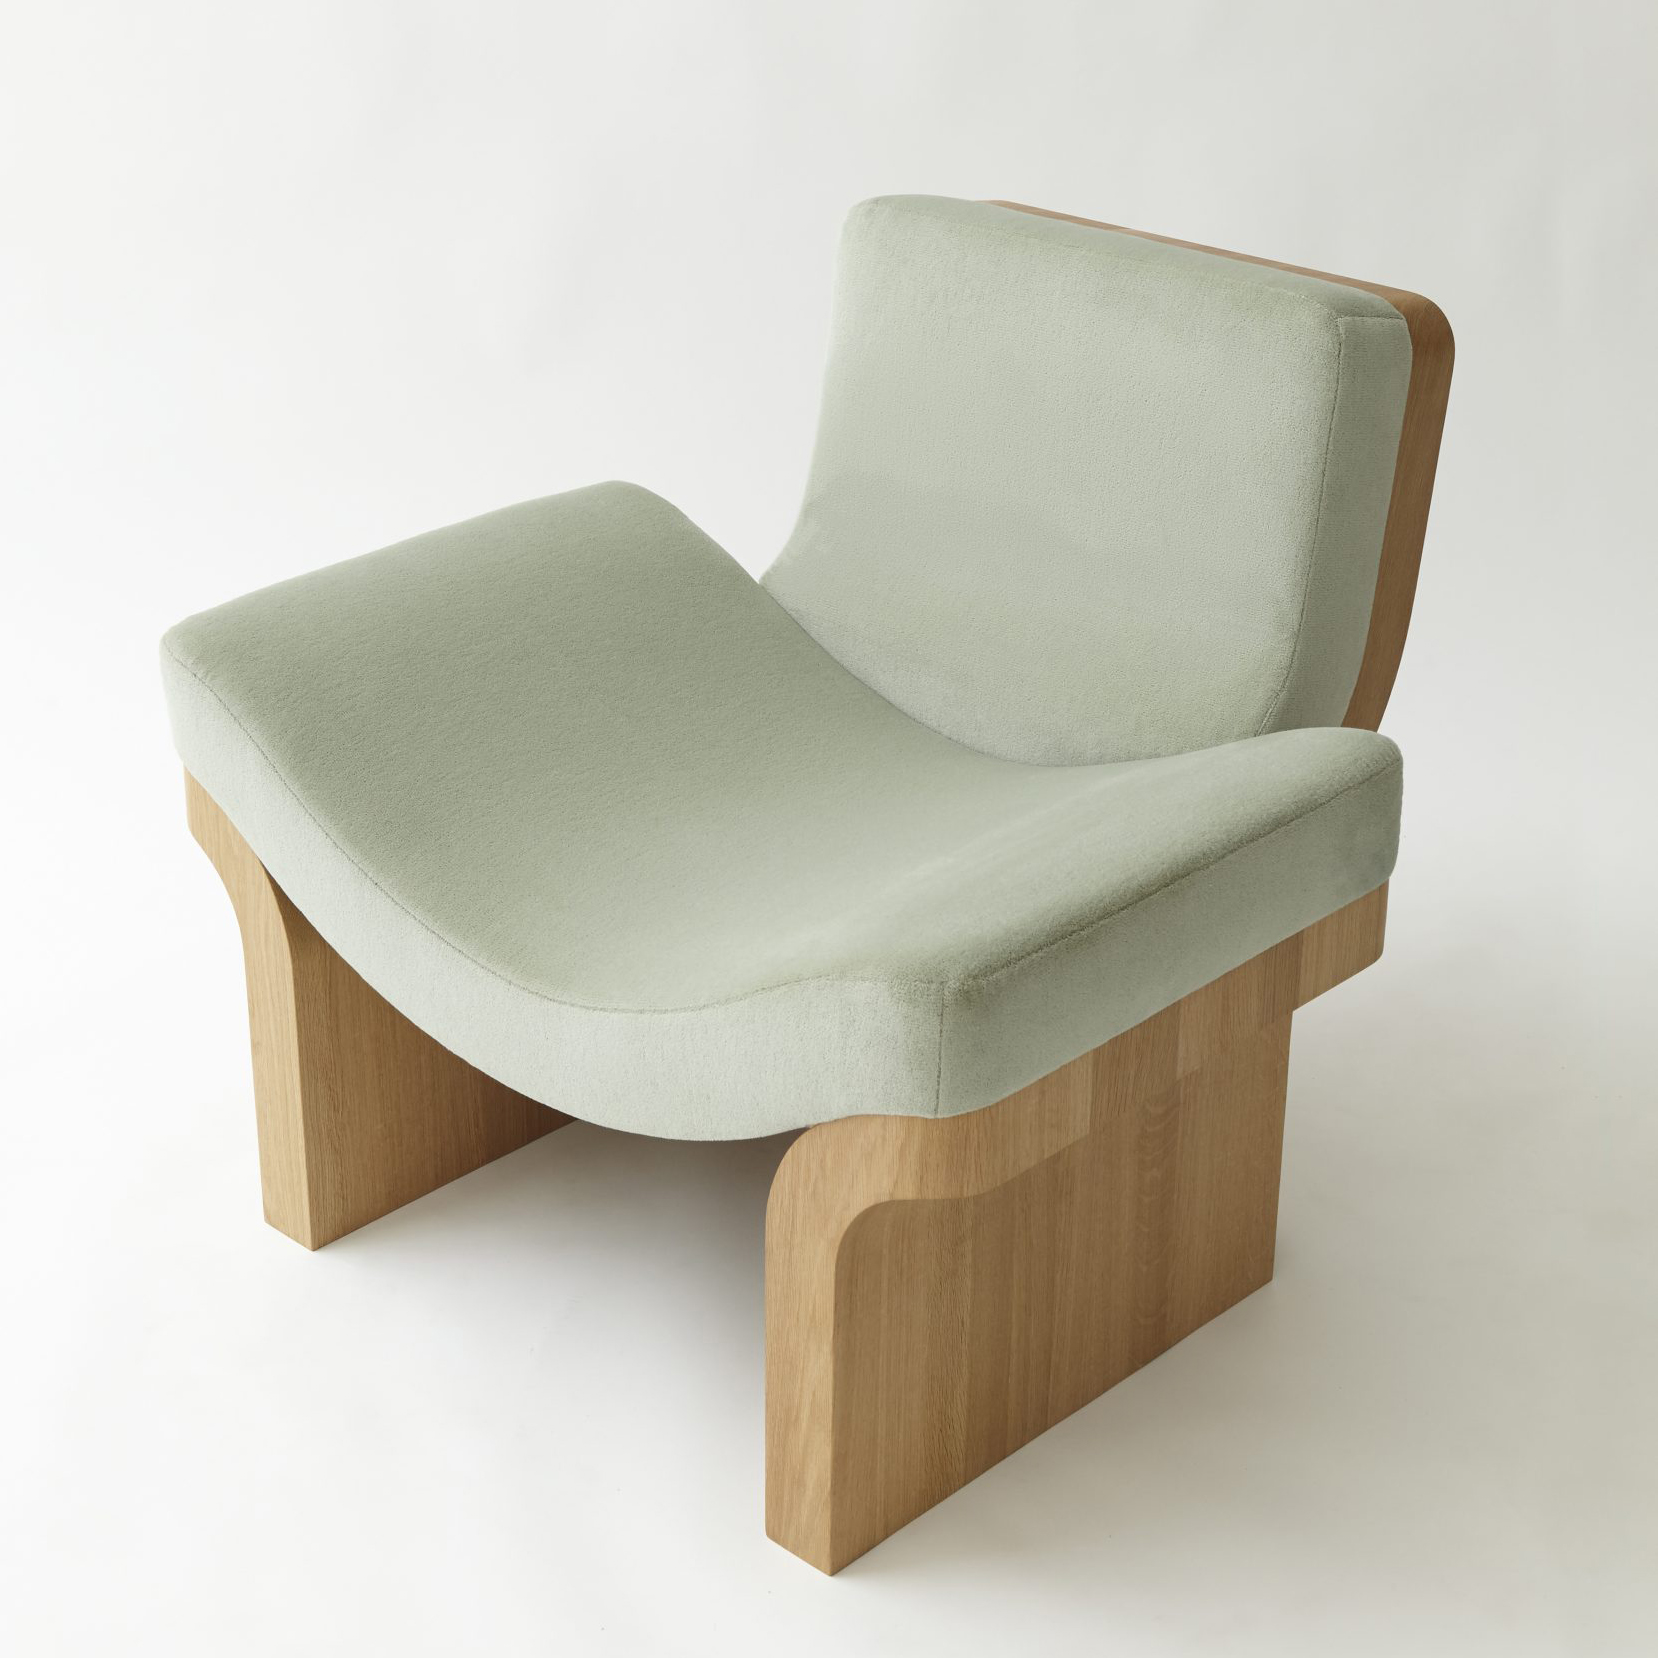 Graceful Seating: The Elegant Bow Chair for Modern Interiors缩略图